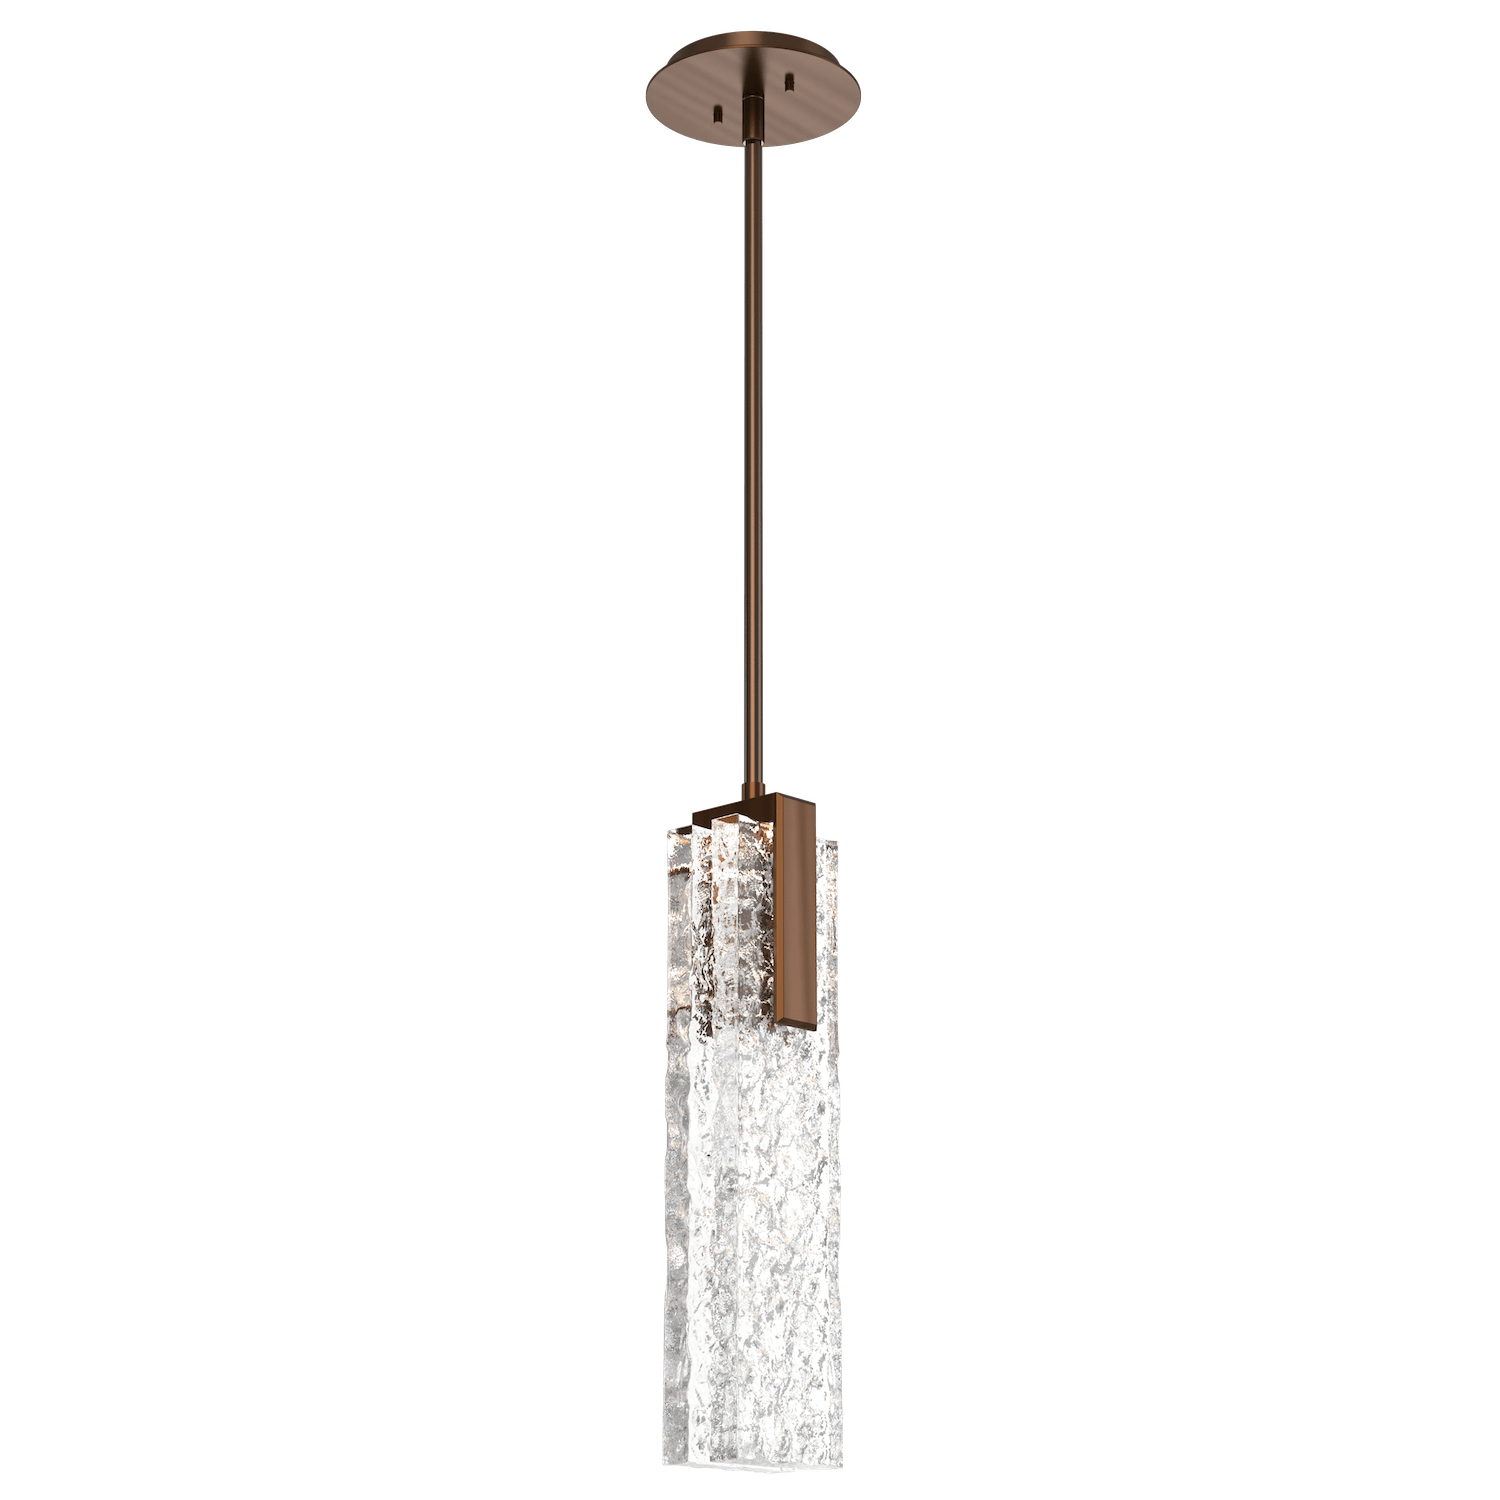 LAB0061-17-RB-GC-Hammerton-Studio-Glacier-pendant-light-with-oil-rubbed-bronze-finish-and-clear-blown-glass-with-geo-clear-cast-glass-diffusers-and-LED-lamping